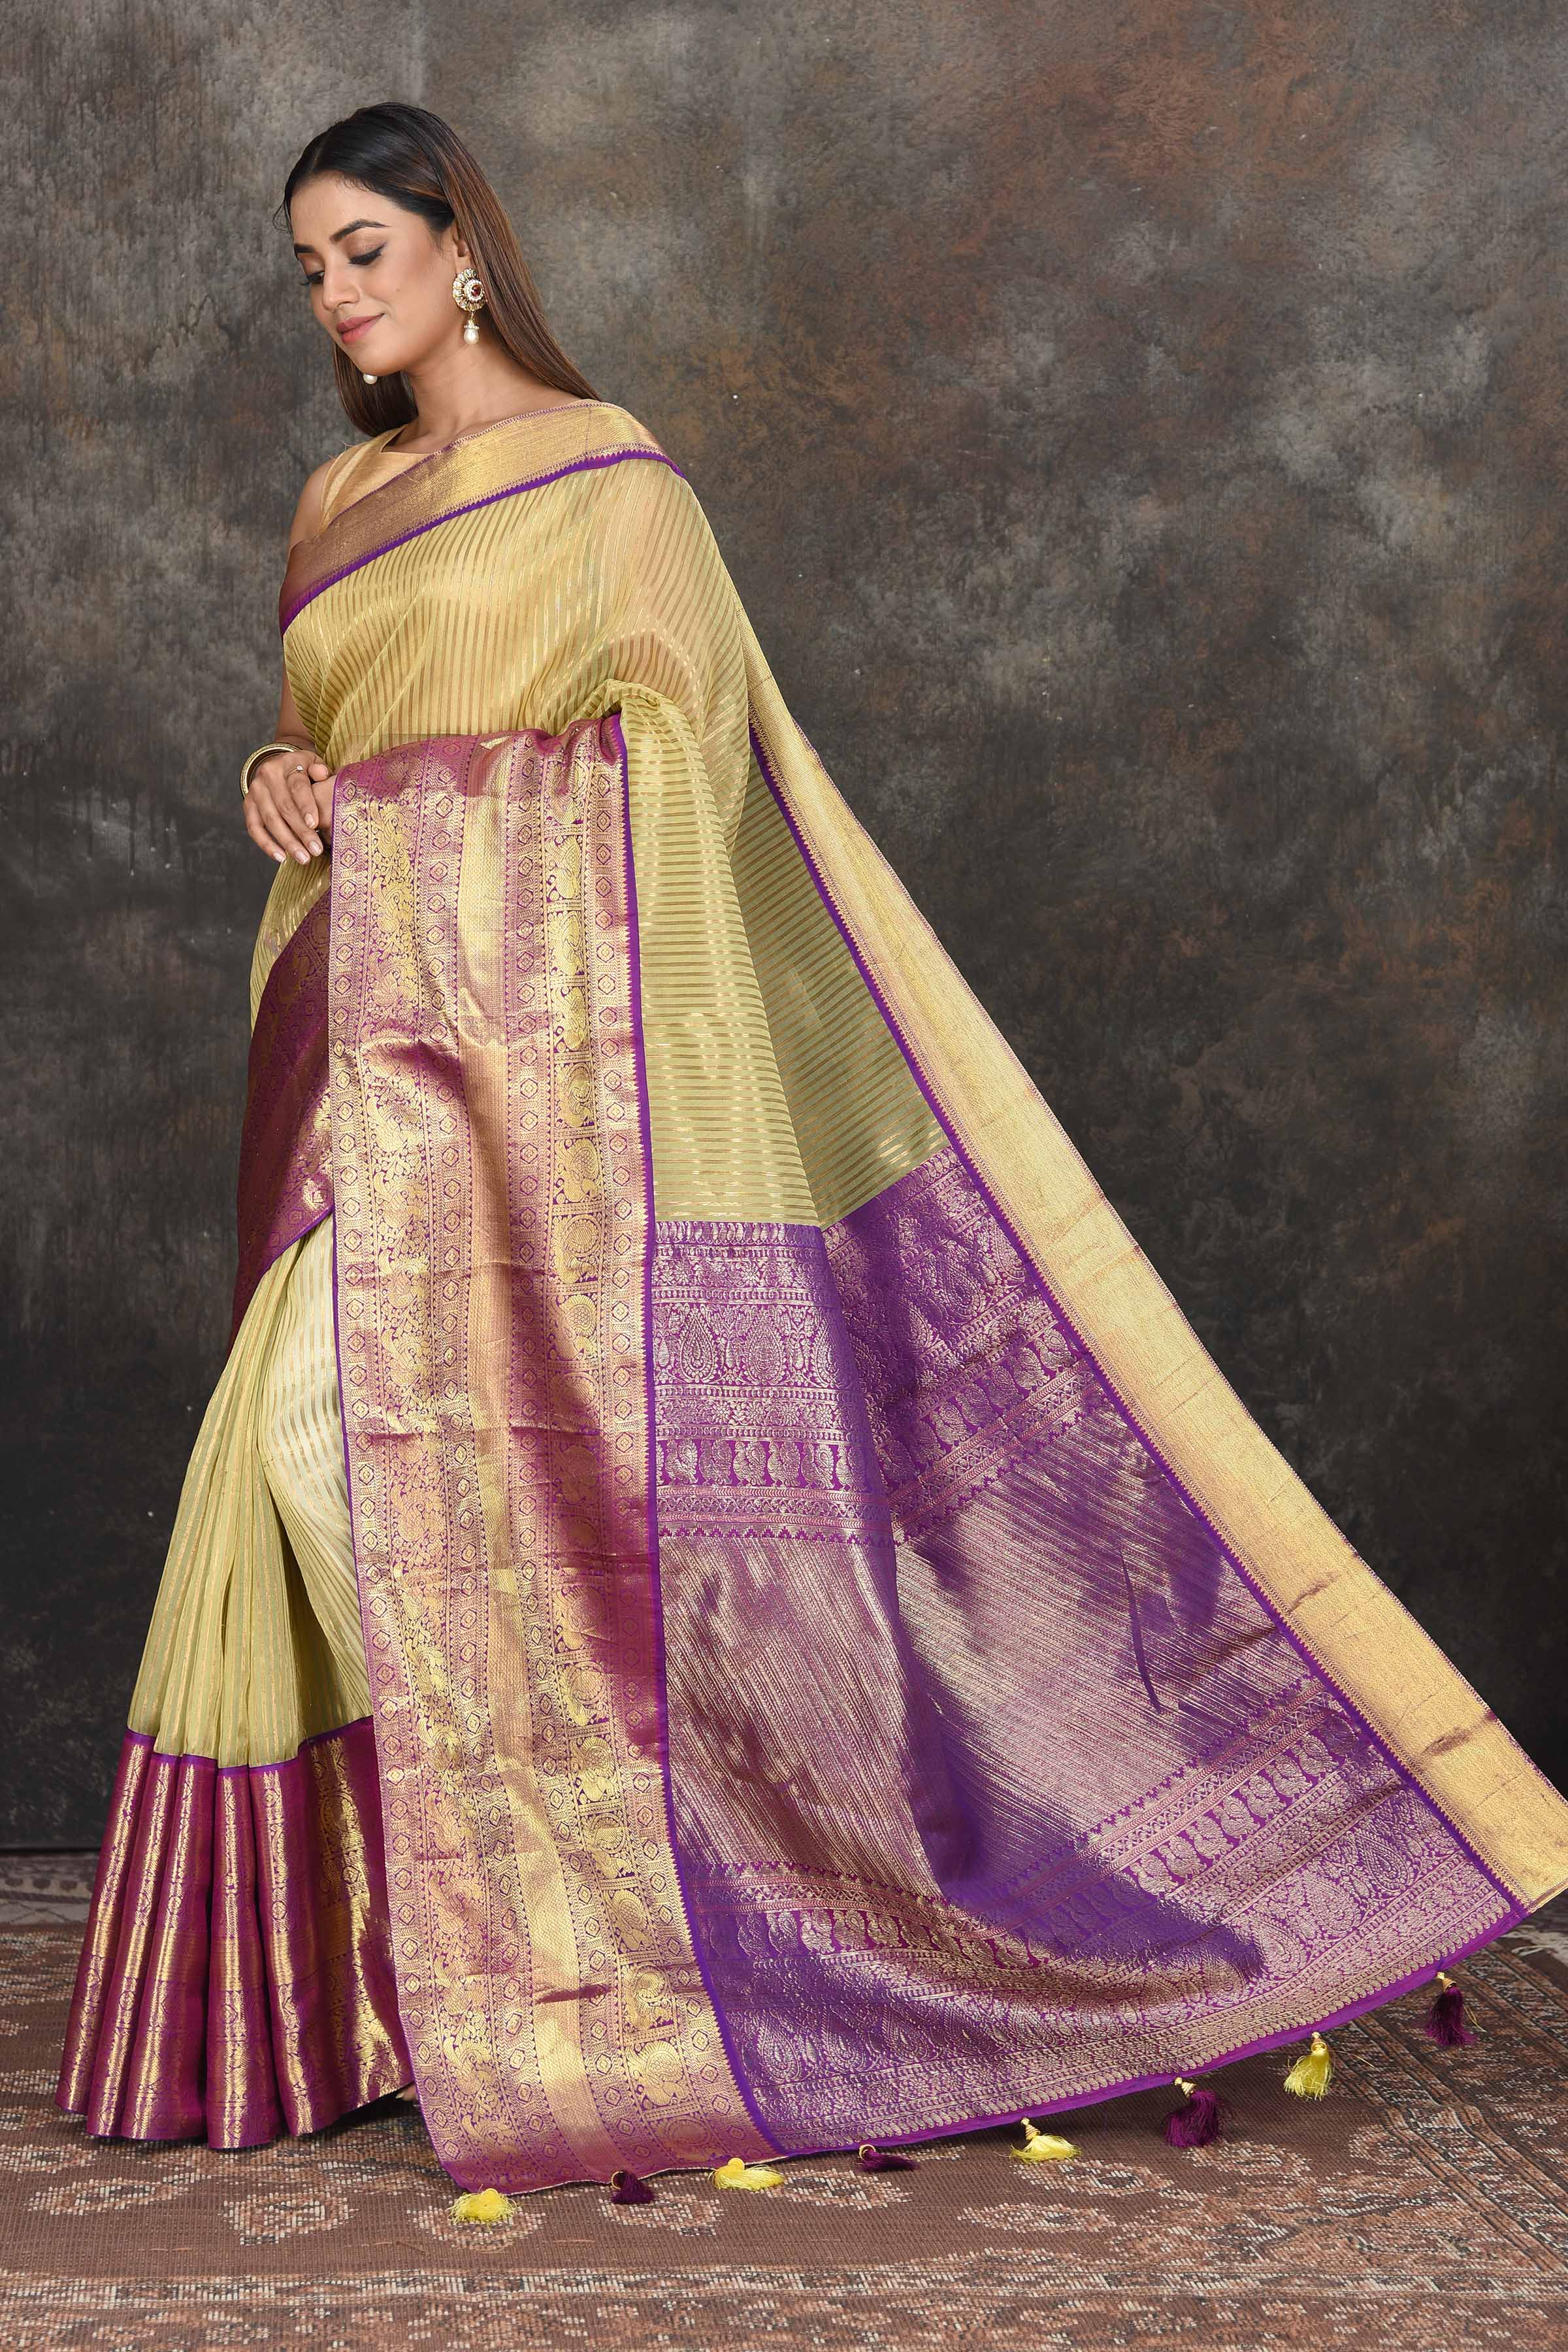 Buy beautiful yellow Kanjeevaram Kora striped saree online in USA with purple zari border. Be the center of attraction on special occasions in ethnic sarees, designer sarees, embroidered sarees, handwoven sarees, pure silk sarees from Pure Elegance Indian saree store in USA.-pallu